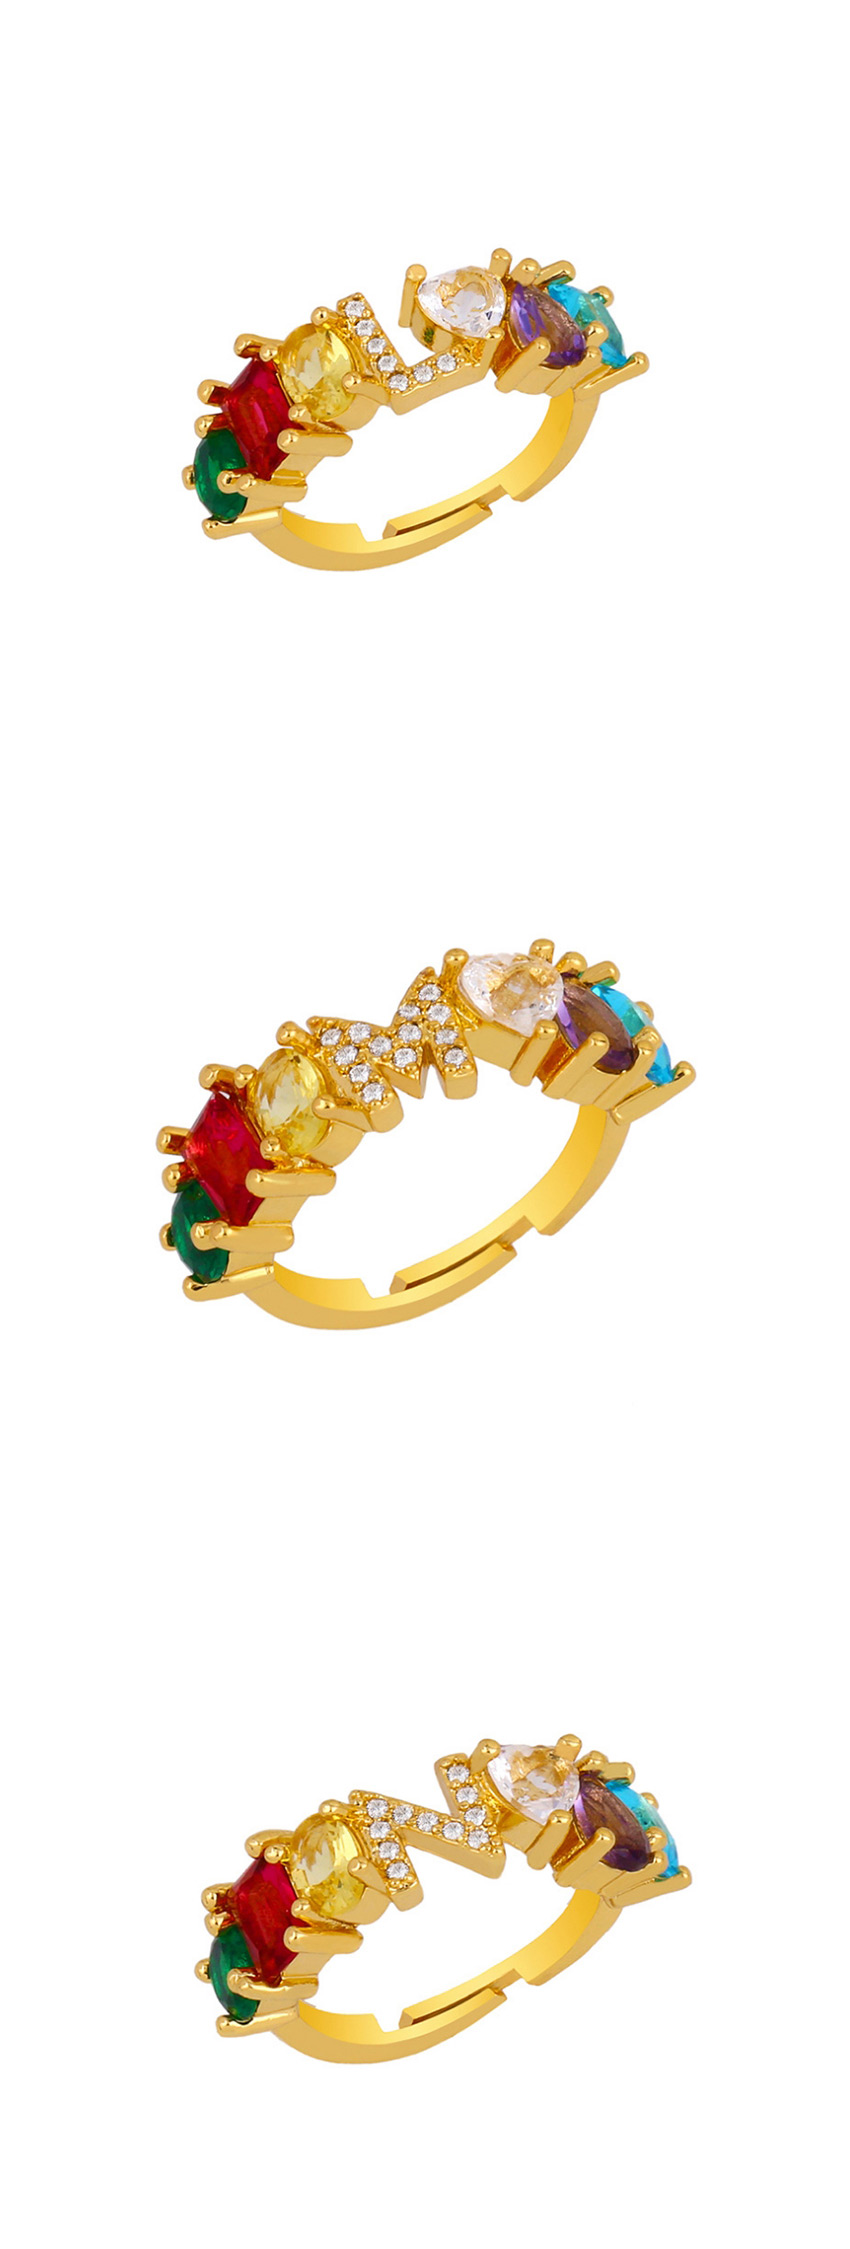 Fashion K Gold Heart-shaped Adjustable Ring With Colorful Diamond Letters,Rings